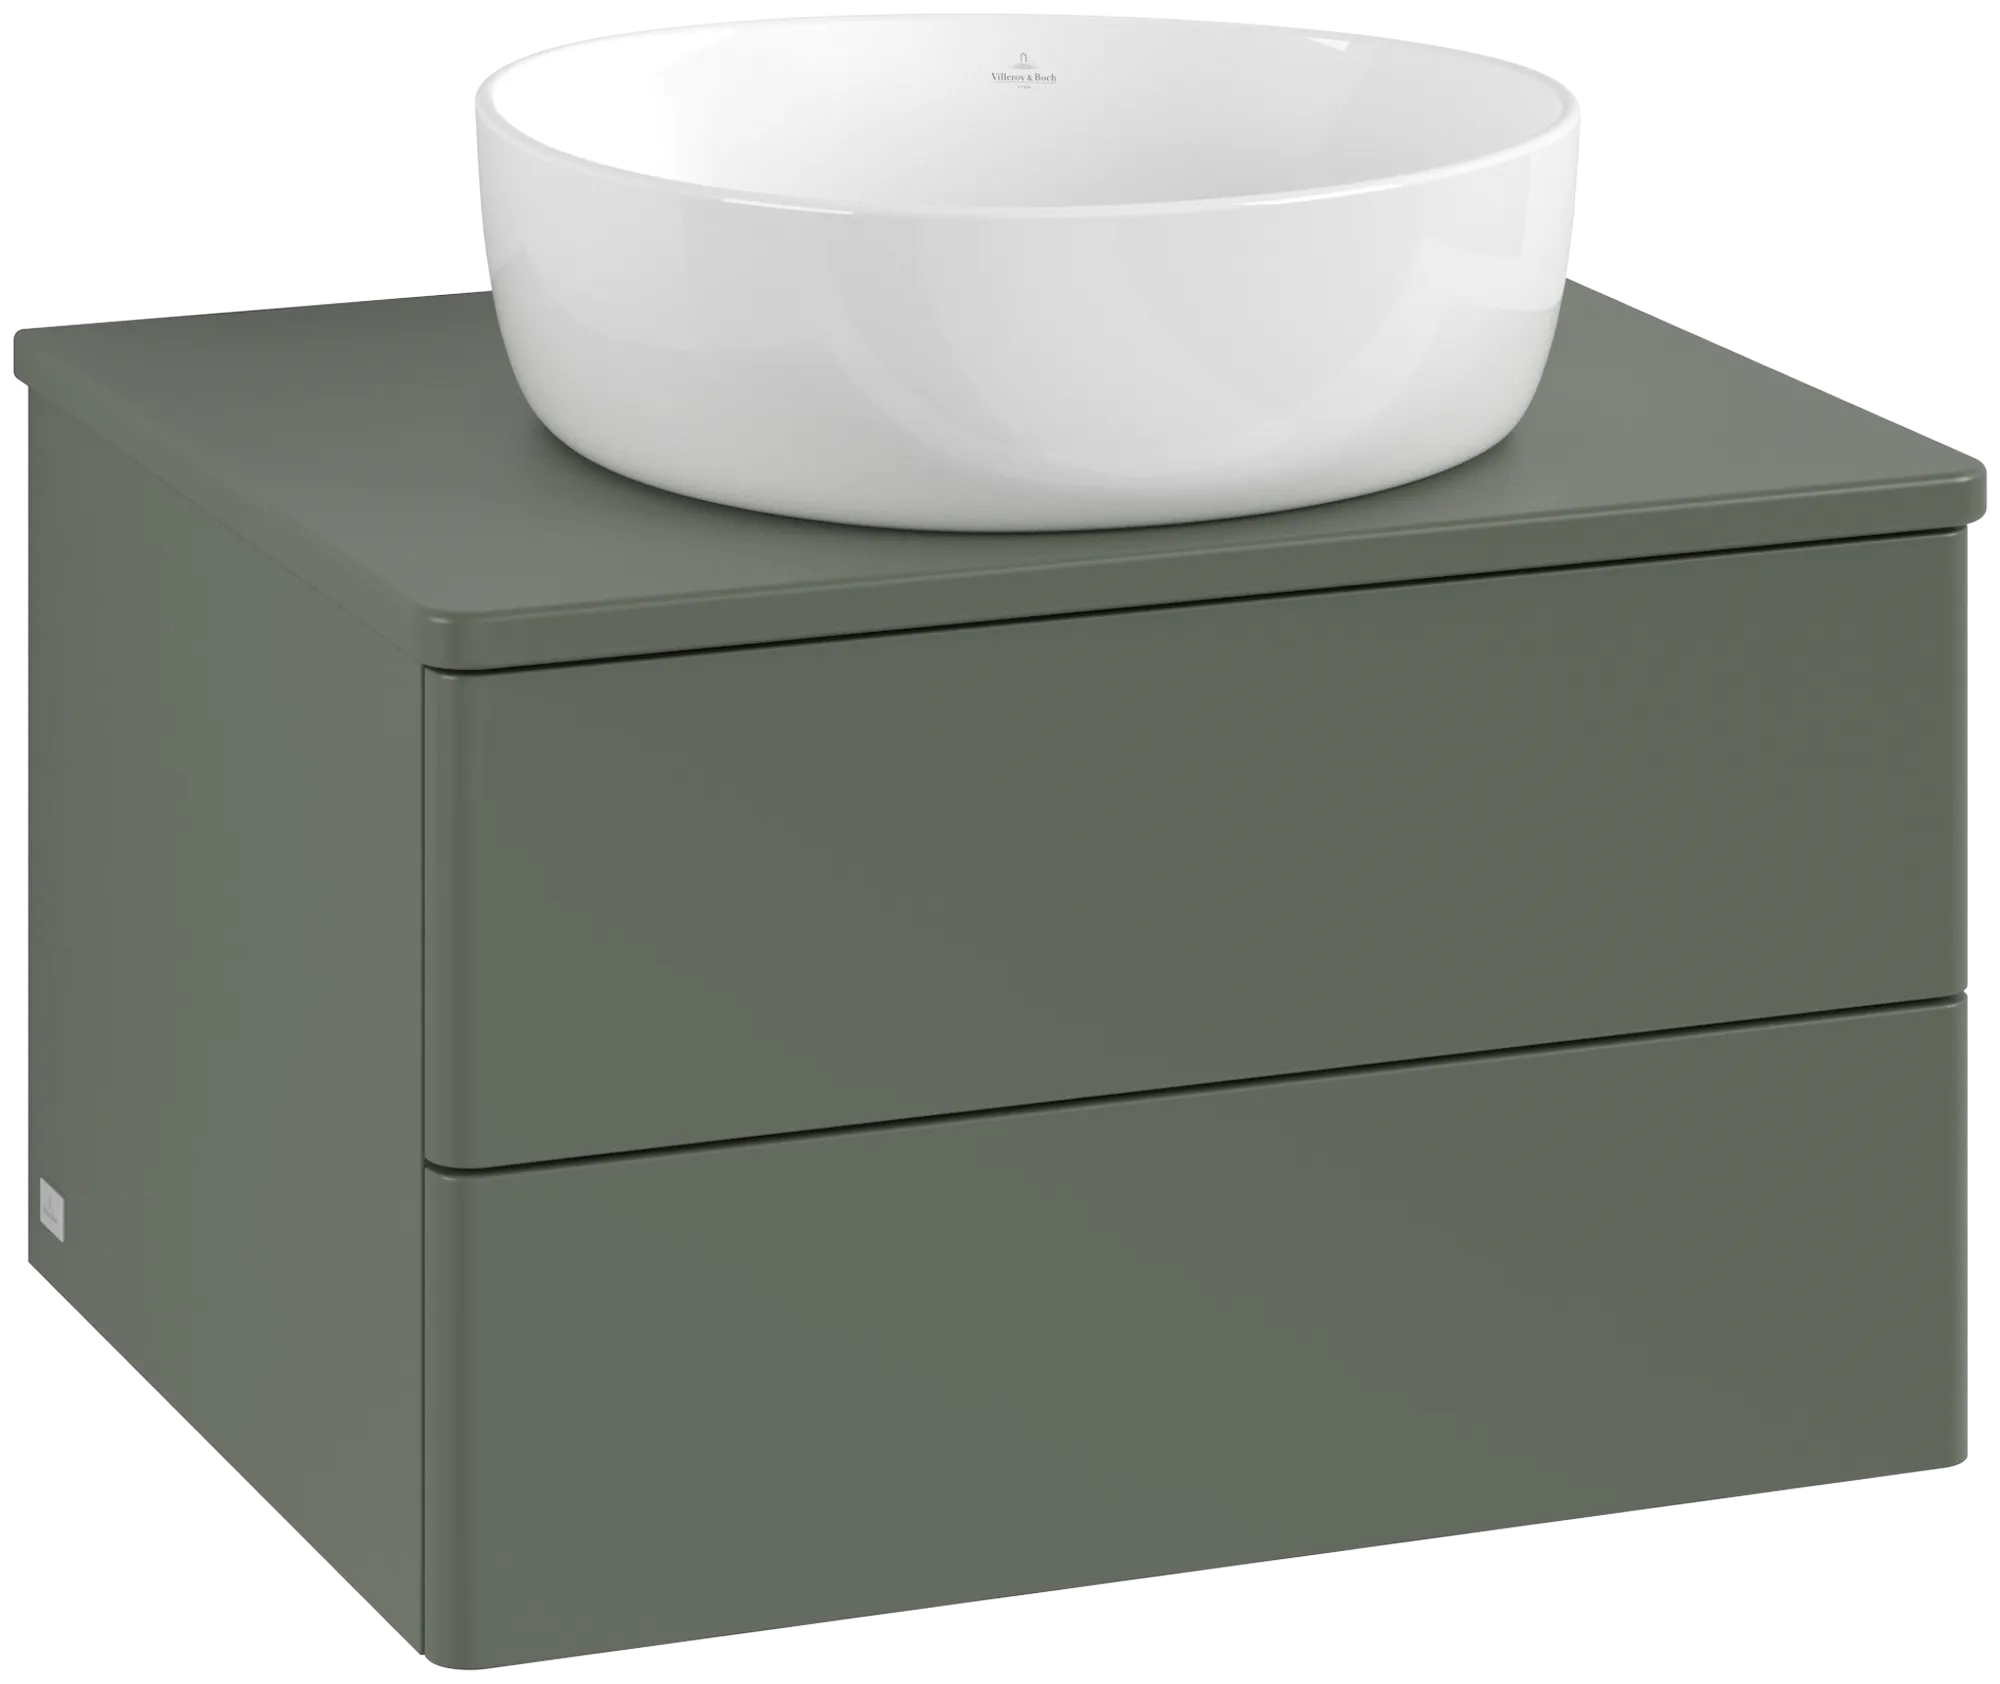 Picture of VILLEROY BOCH Antao Vanity unit, with lighting, 2 pull-out compartments, 600 x 360 x 500 mm, Front without structure, Leaf Green Matt Lacquer / Leaf Green Matt Lacquer #L18050HL